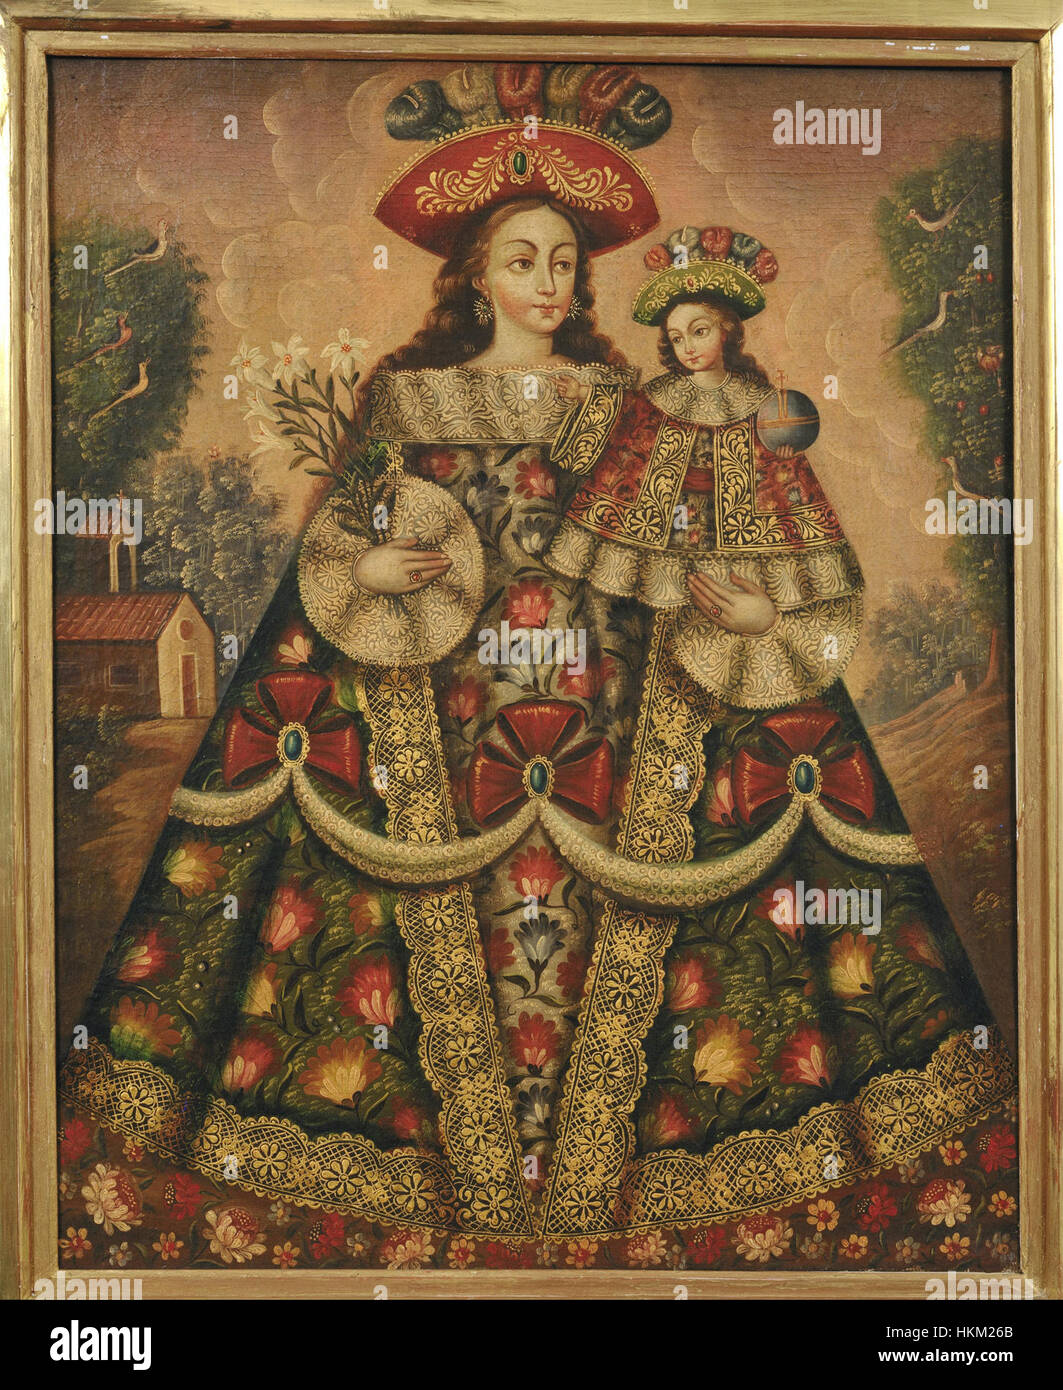 Anonymous, Cuzco School, Peru - The Virgin of the Pilgrims and Child - Google Art Project Stock Photo